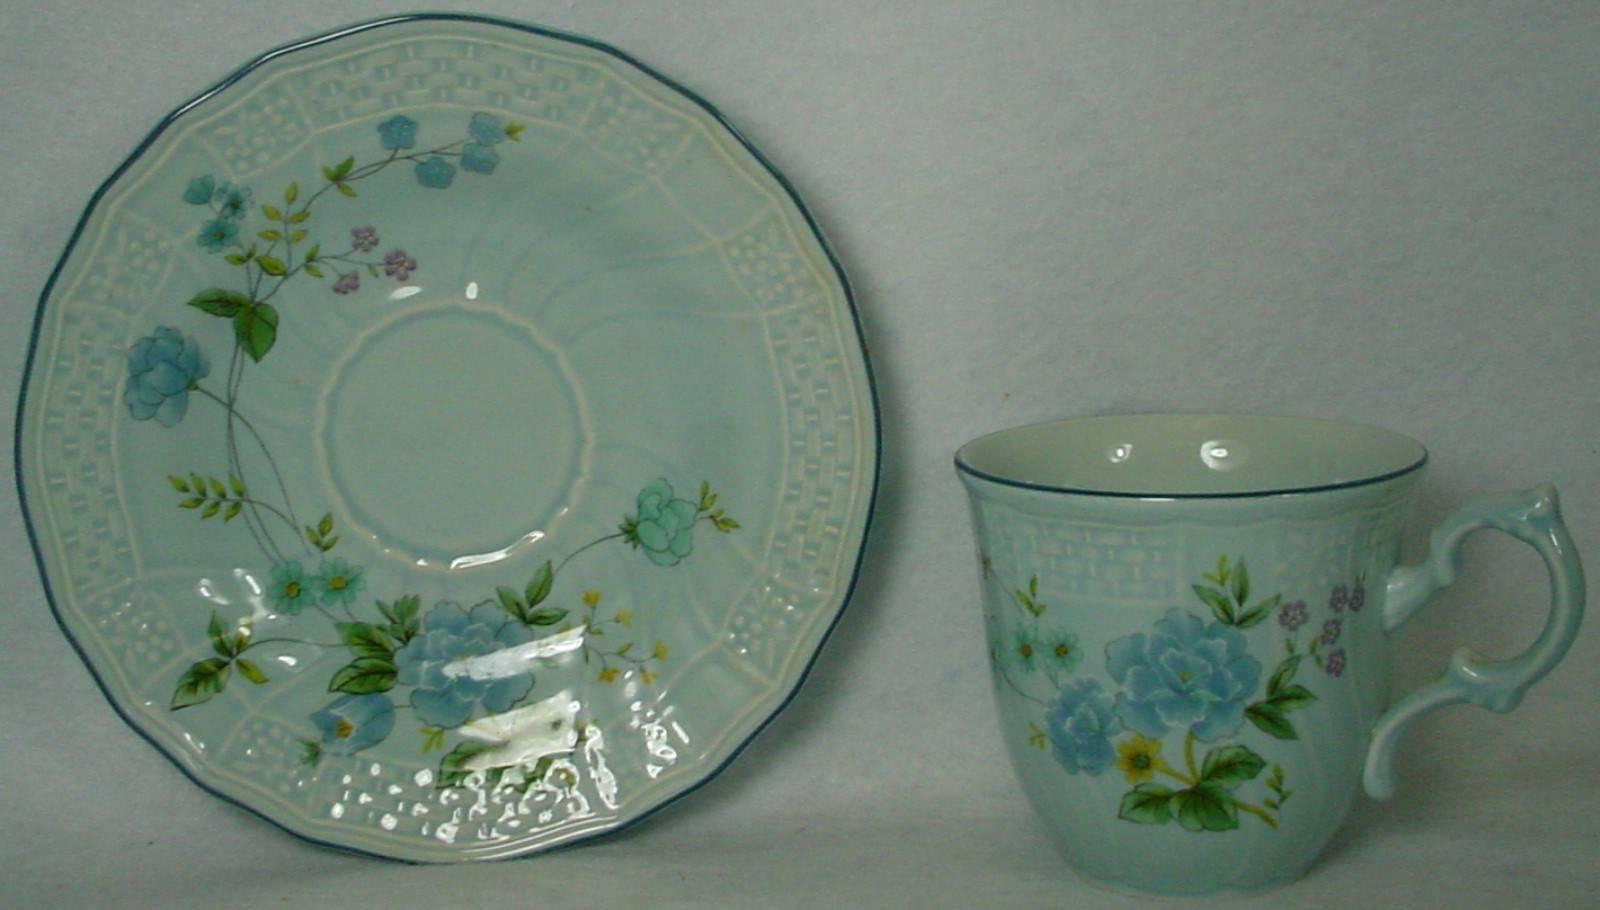 
MIKASA china MICHELLE D2501 pattern 40-pc SET SERICE for EIGHT (8)

in great condition free from chips, cracks, breaks, stains, or discolorations and with only a minimum of use. All items have small wear/scratch to pattern (shown in image of